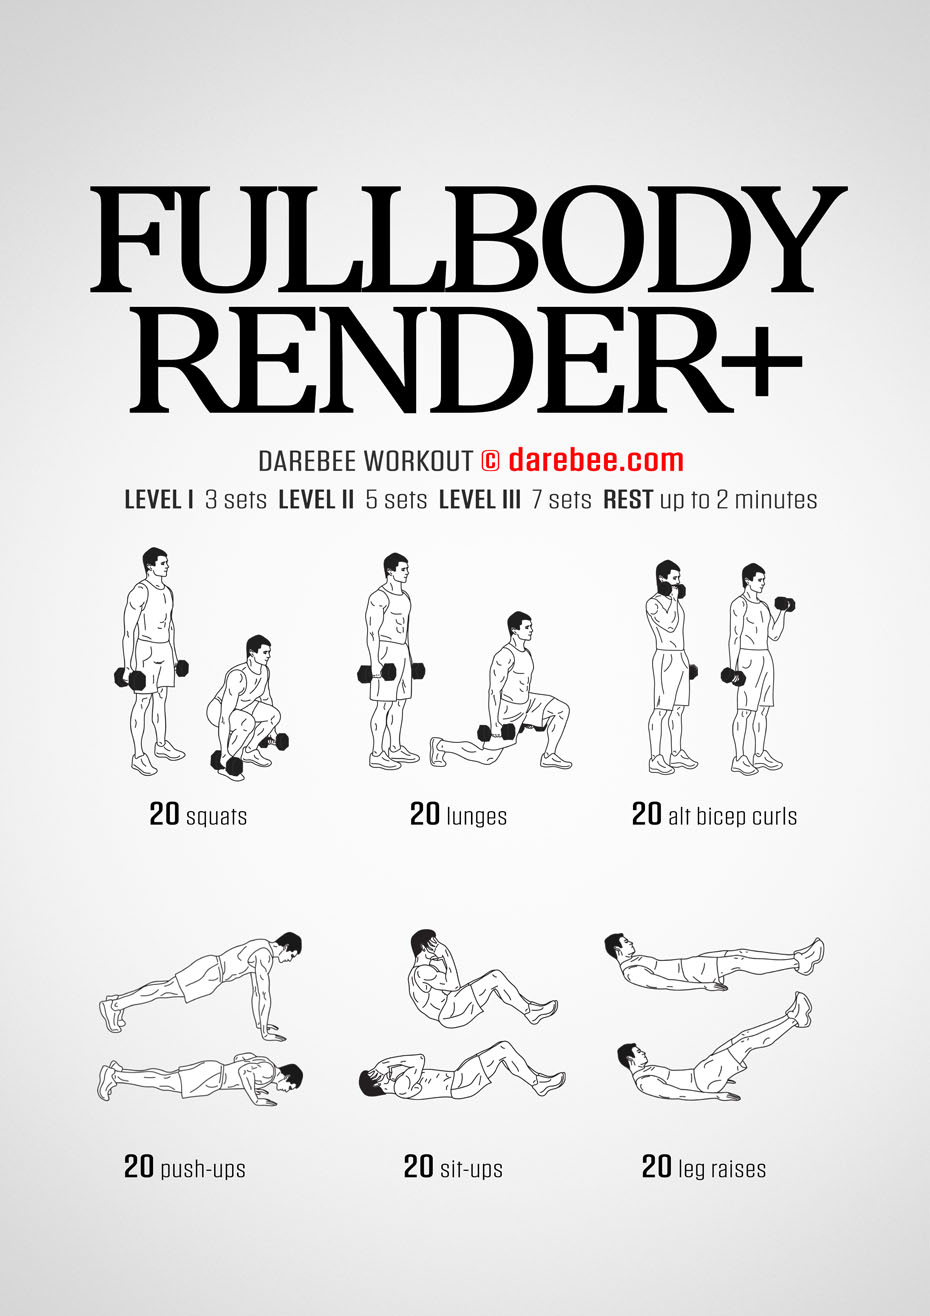 Full Body Dumbbell Workout Routine At Home Pdf ...